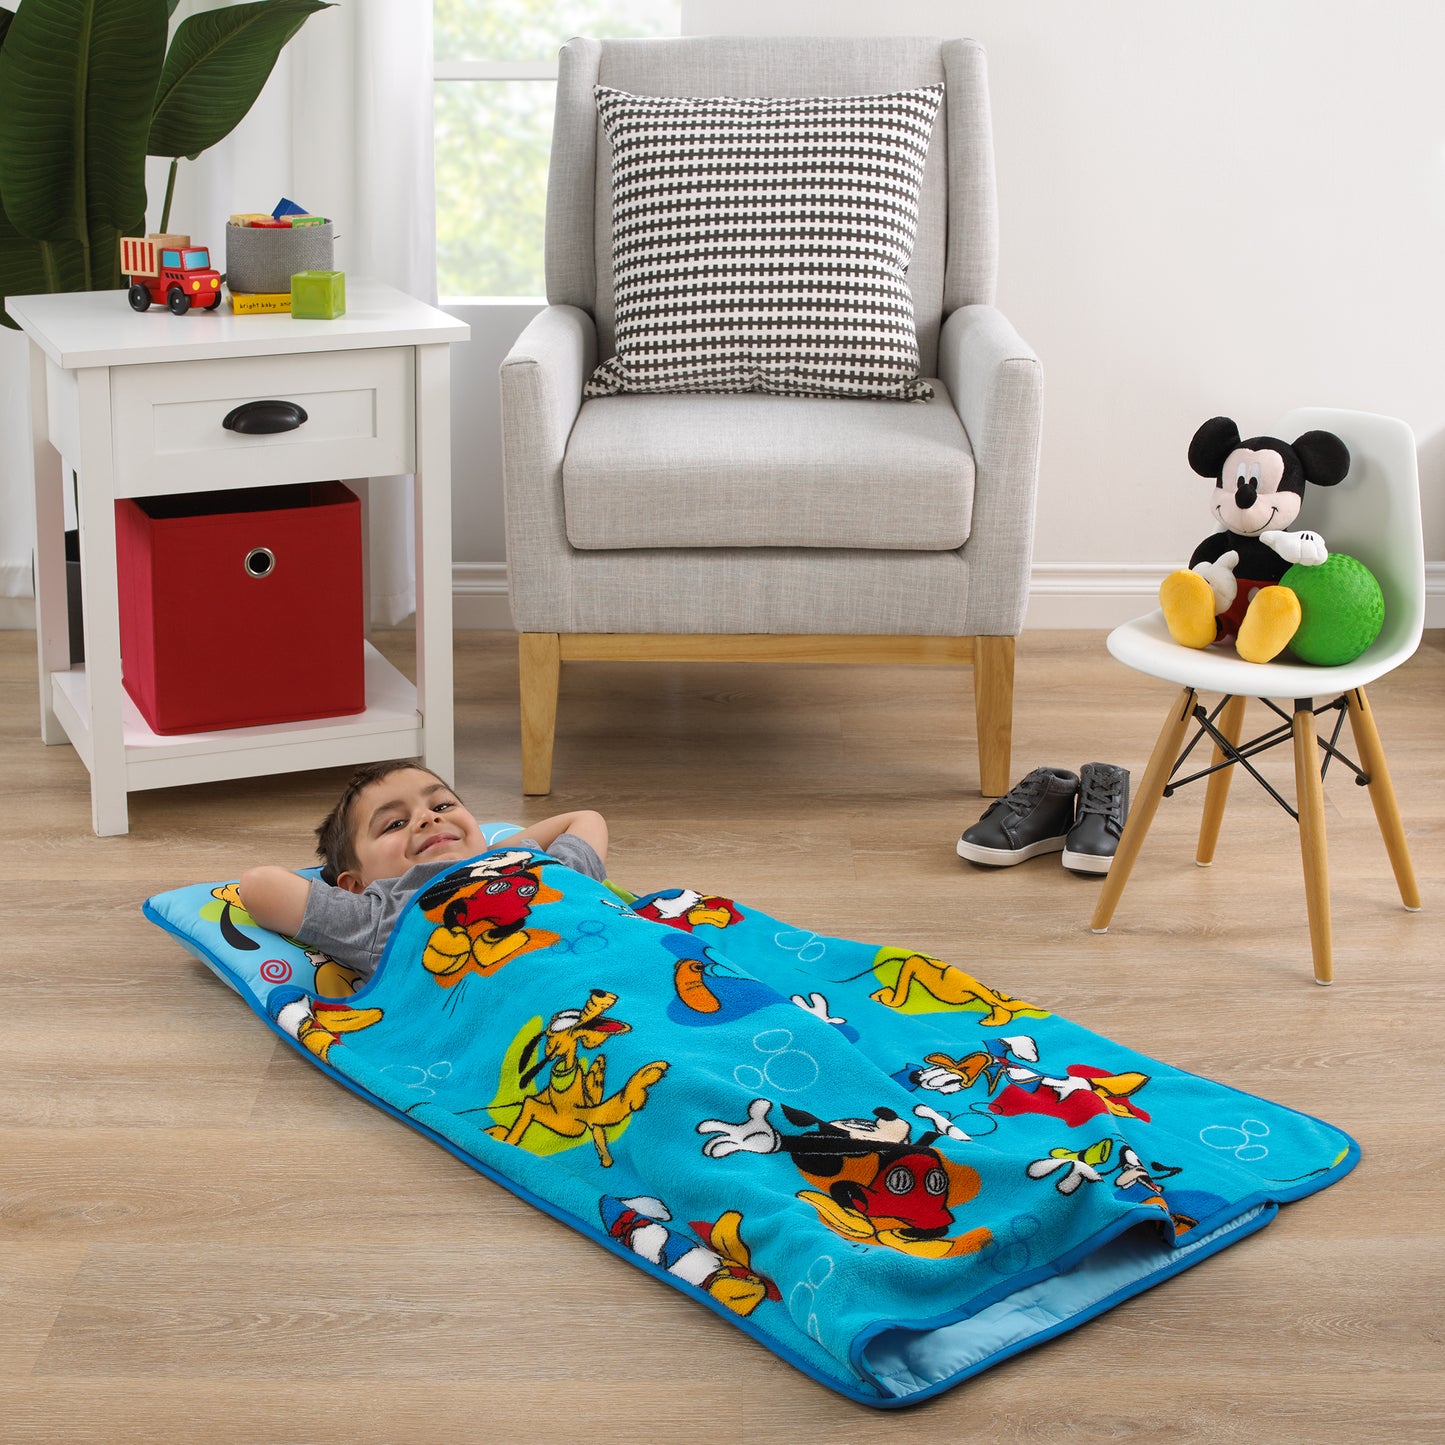 Disney Mickey Mouse Blue, Red, and Green, Donald Duck, Pluto, and Goofy, Fun Starts Here Toddler Nap Mat